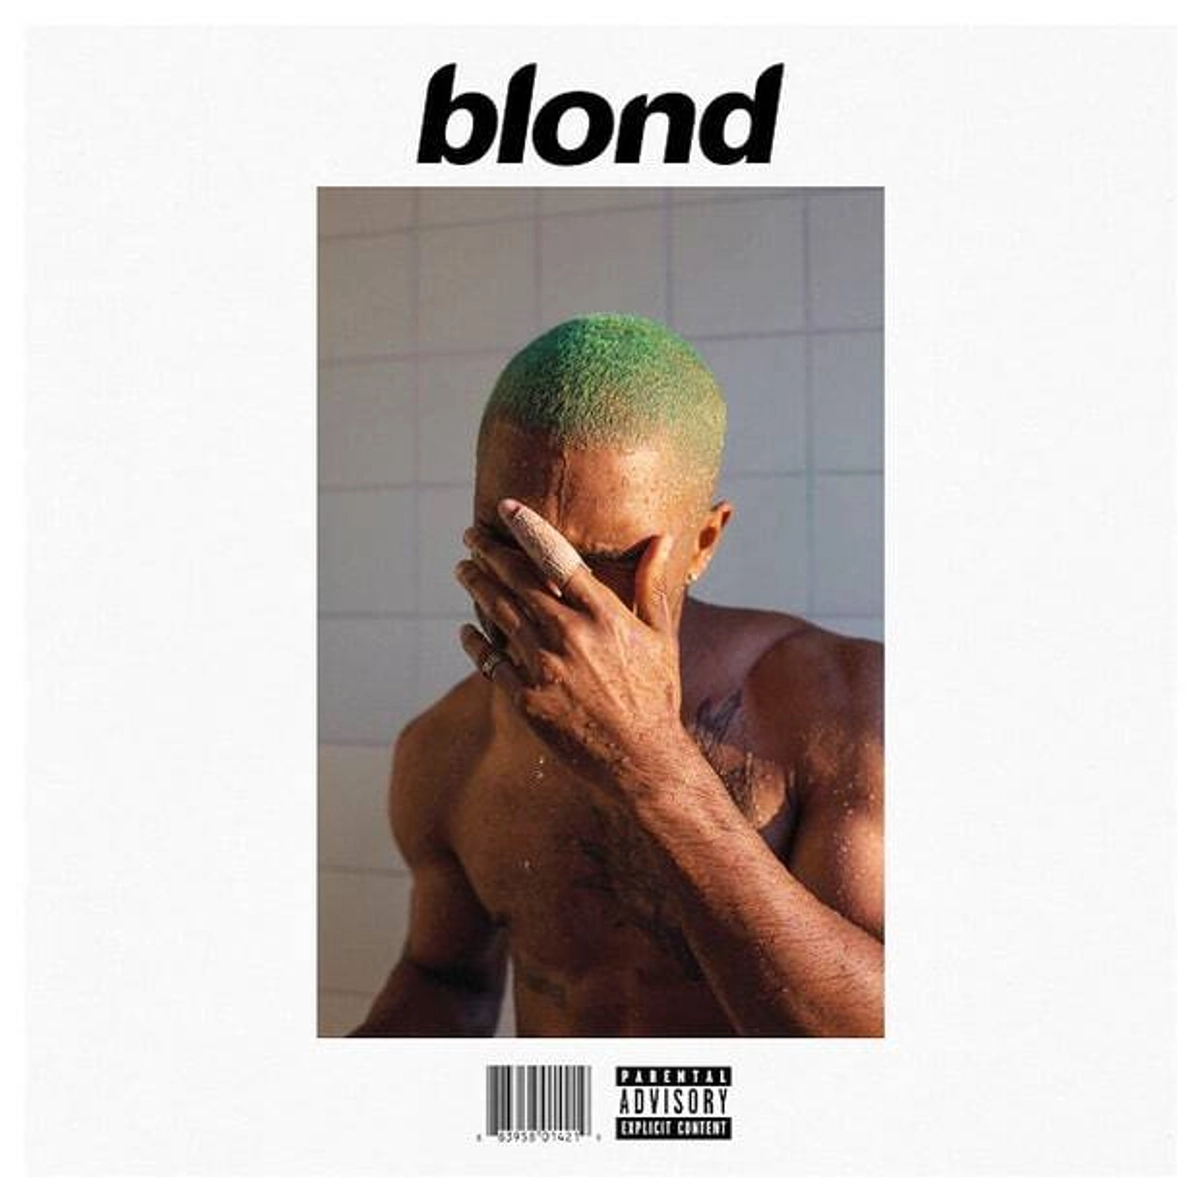 In+Frank+Oceans+song+White+Ferrari+describes+his+emotional+journey+as+he+is+getting+over+the+loss+of+his+brother+%28Photo+released+by+Three+Six+Zero+Entertainment%29.